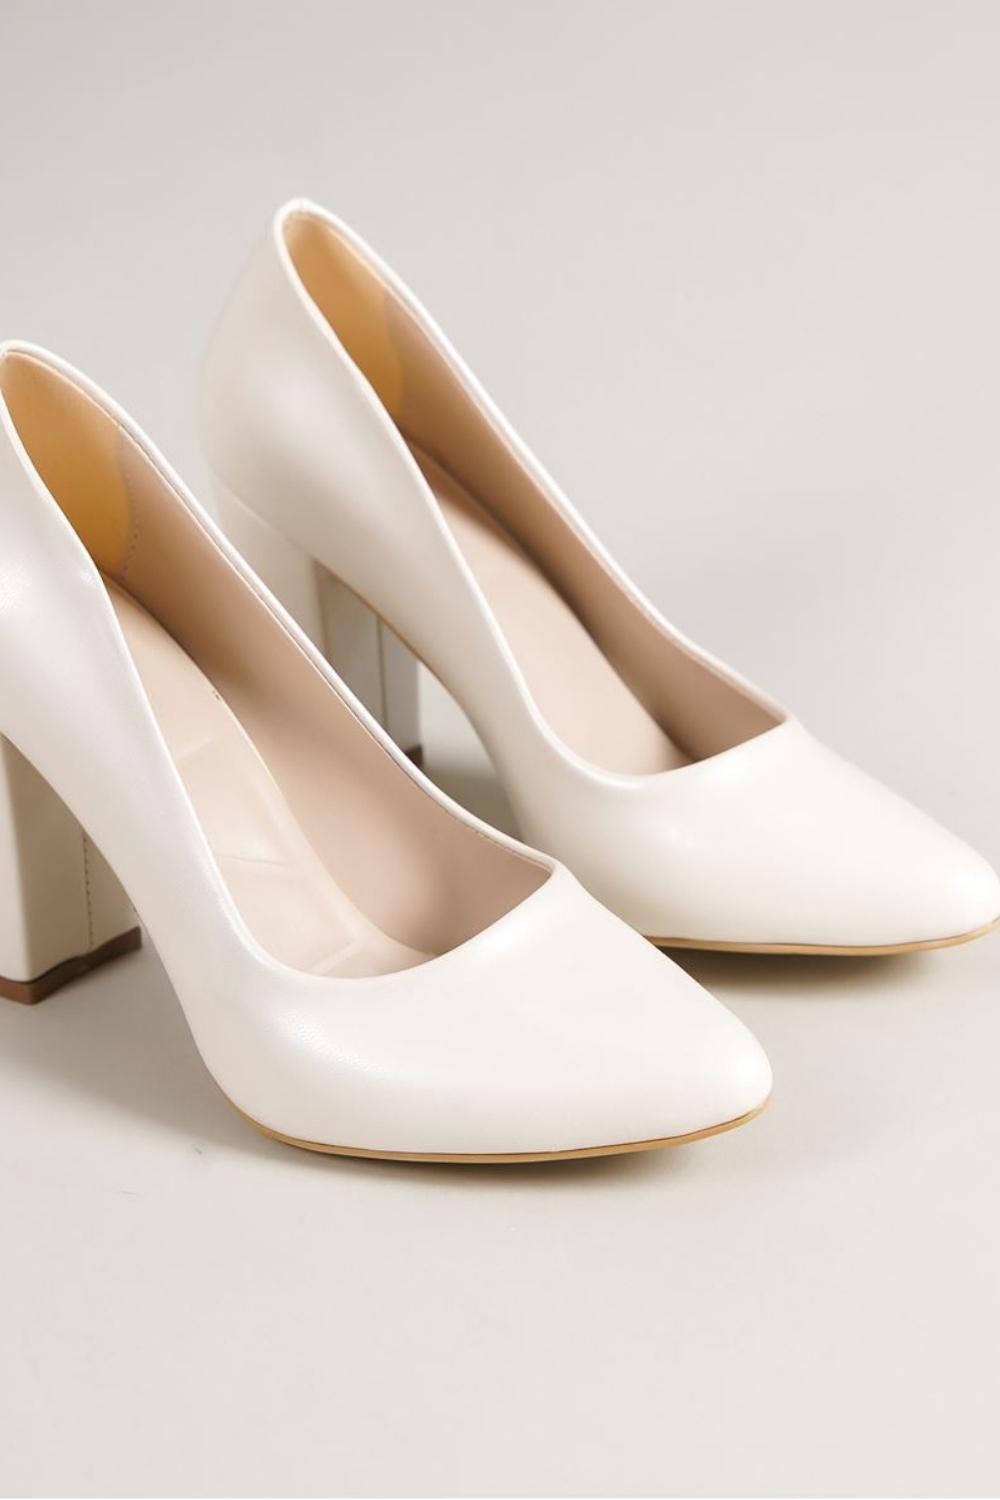 Marry White Pearl Detailed Heeled Women's Shoes - STREETMODE ™